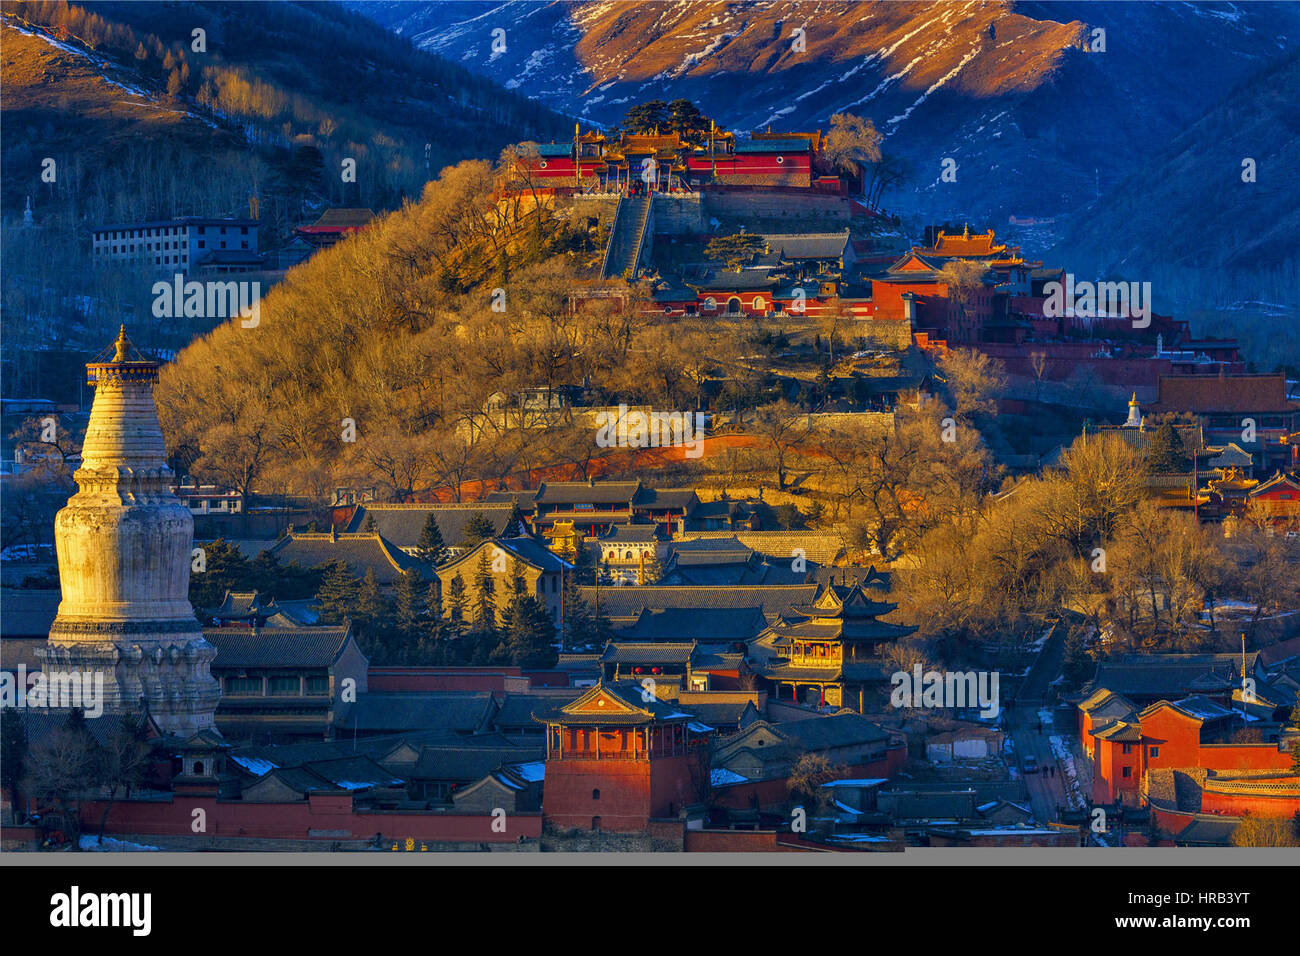 Xinzh, Xinzh, China. 25th Feb, 2017. Xinzhou, CHINA-February 25 2017: (EDITORIAL USE ONLY. CHINA OUT) .Mount Wutai, also known as Wutai Mountain or Qingliang Shan, is a Buddhist sacred site located at the headwaters of river Qingshui, in north China's Shanxi Province, surrounded by a cluster of flat-topped peaks (North, South, East, West, and Central). The North peak, called Beitai Ding or Yedou Feng, is the highest (3,061 m) of these, and is also the highest point in northern China. As host to over 53 sacred monasteries, Mount Wutai is home to many of China's most important monasteries Stock Photo